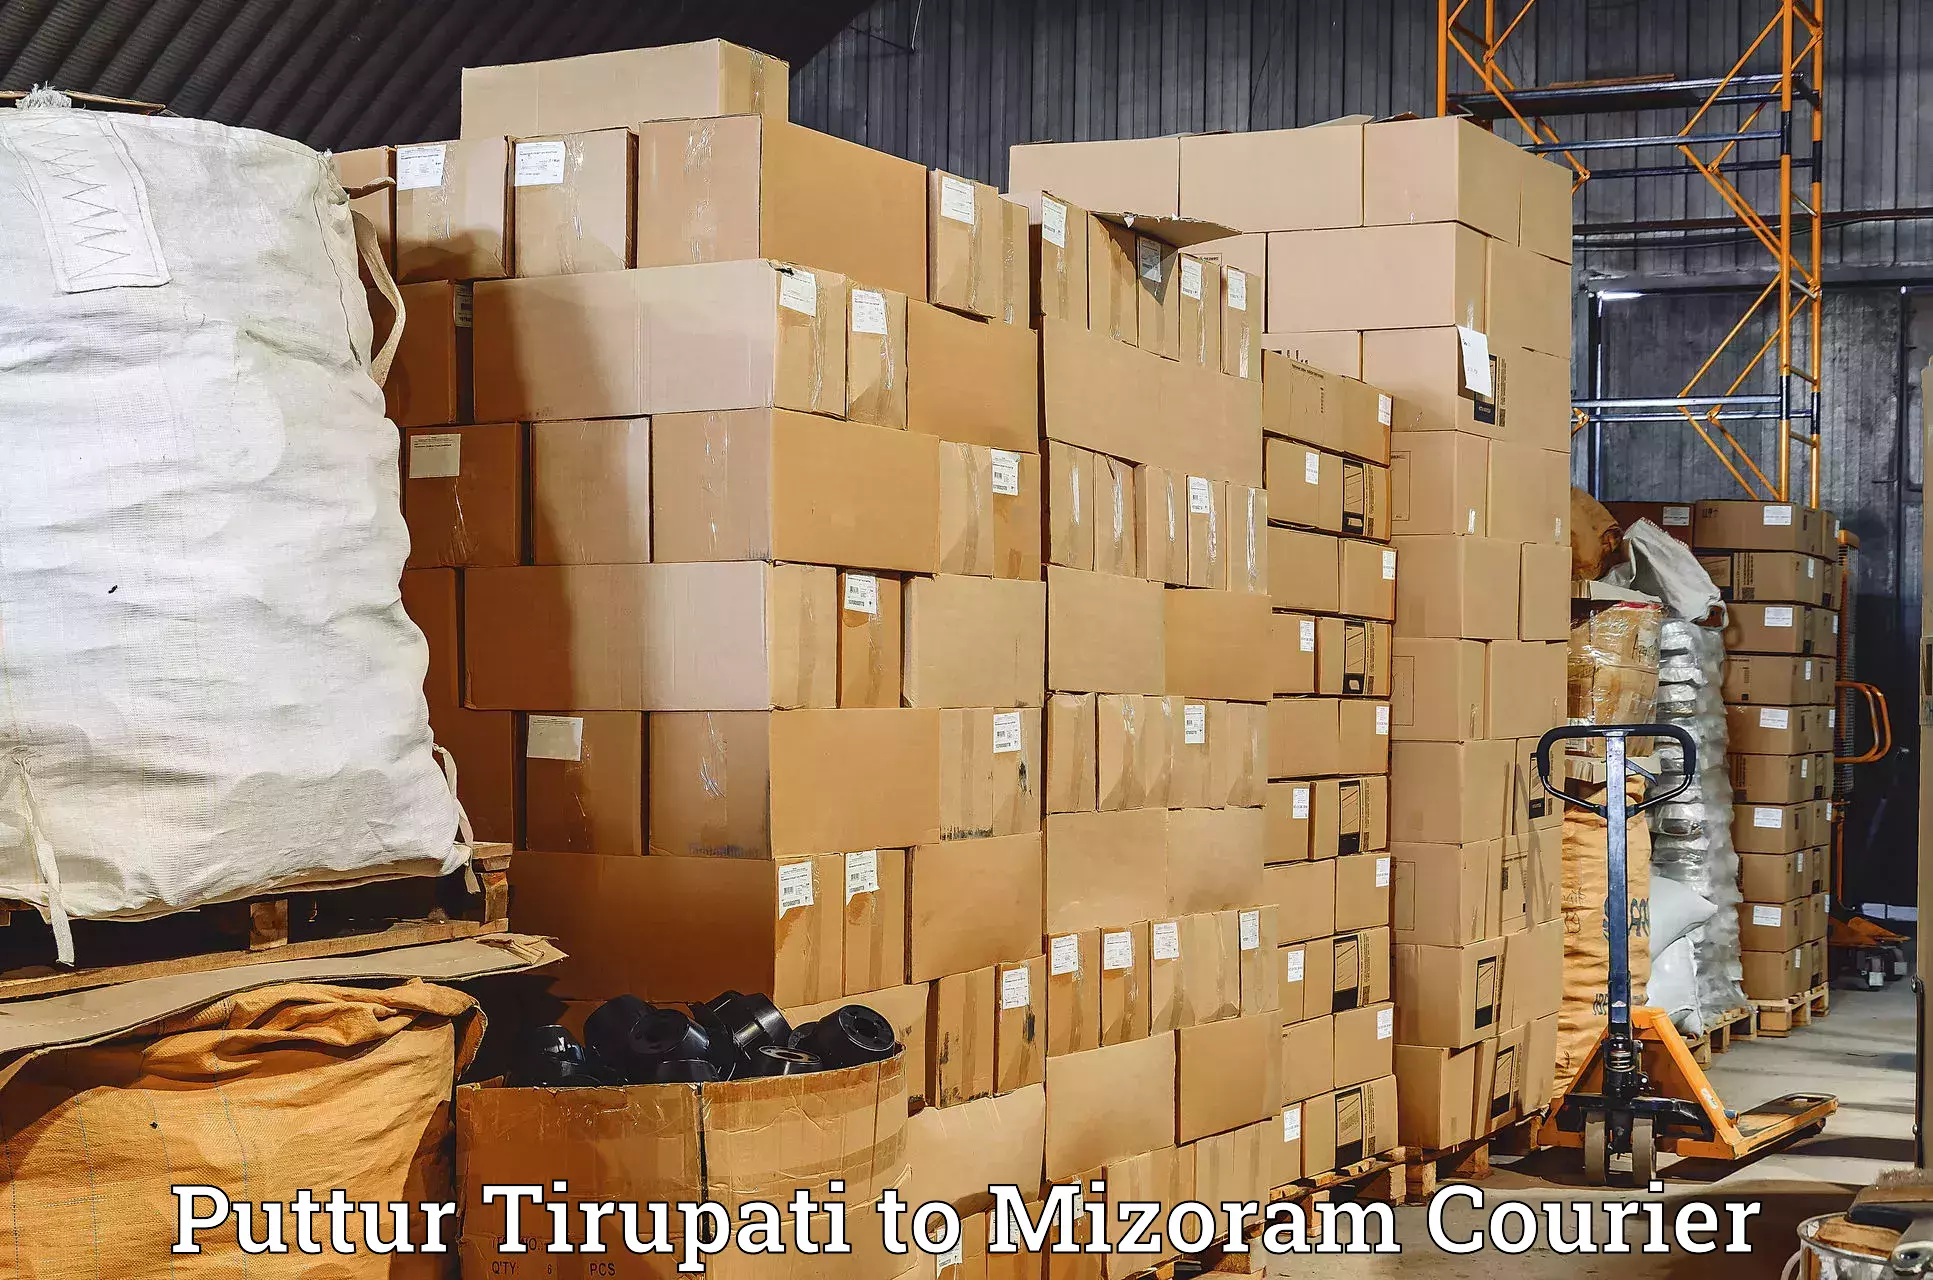 State-of-the-art courier technology Puttur Tirupati to Siaha